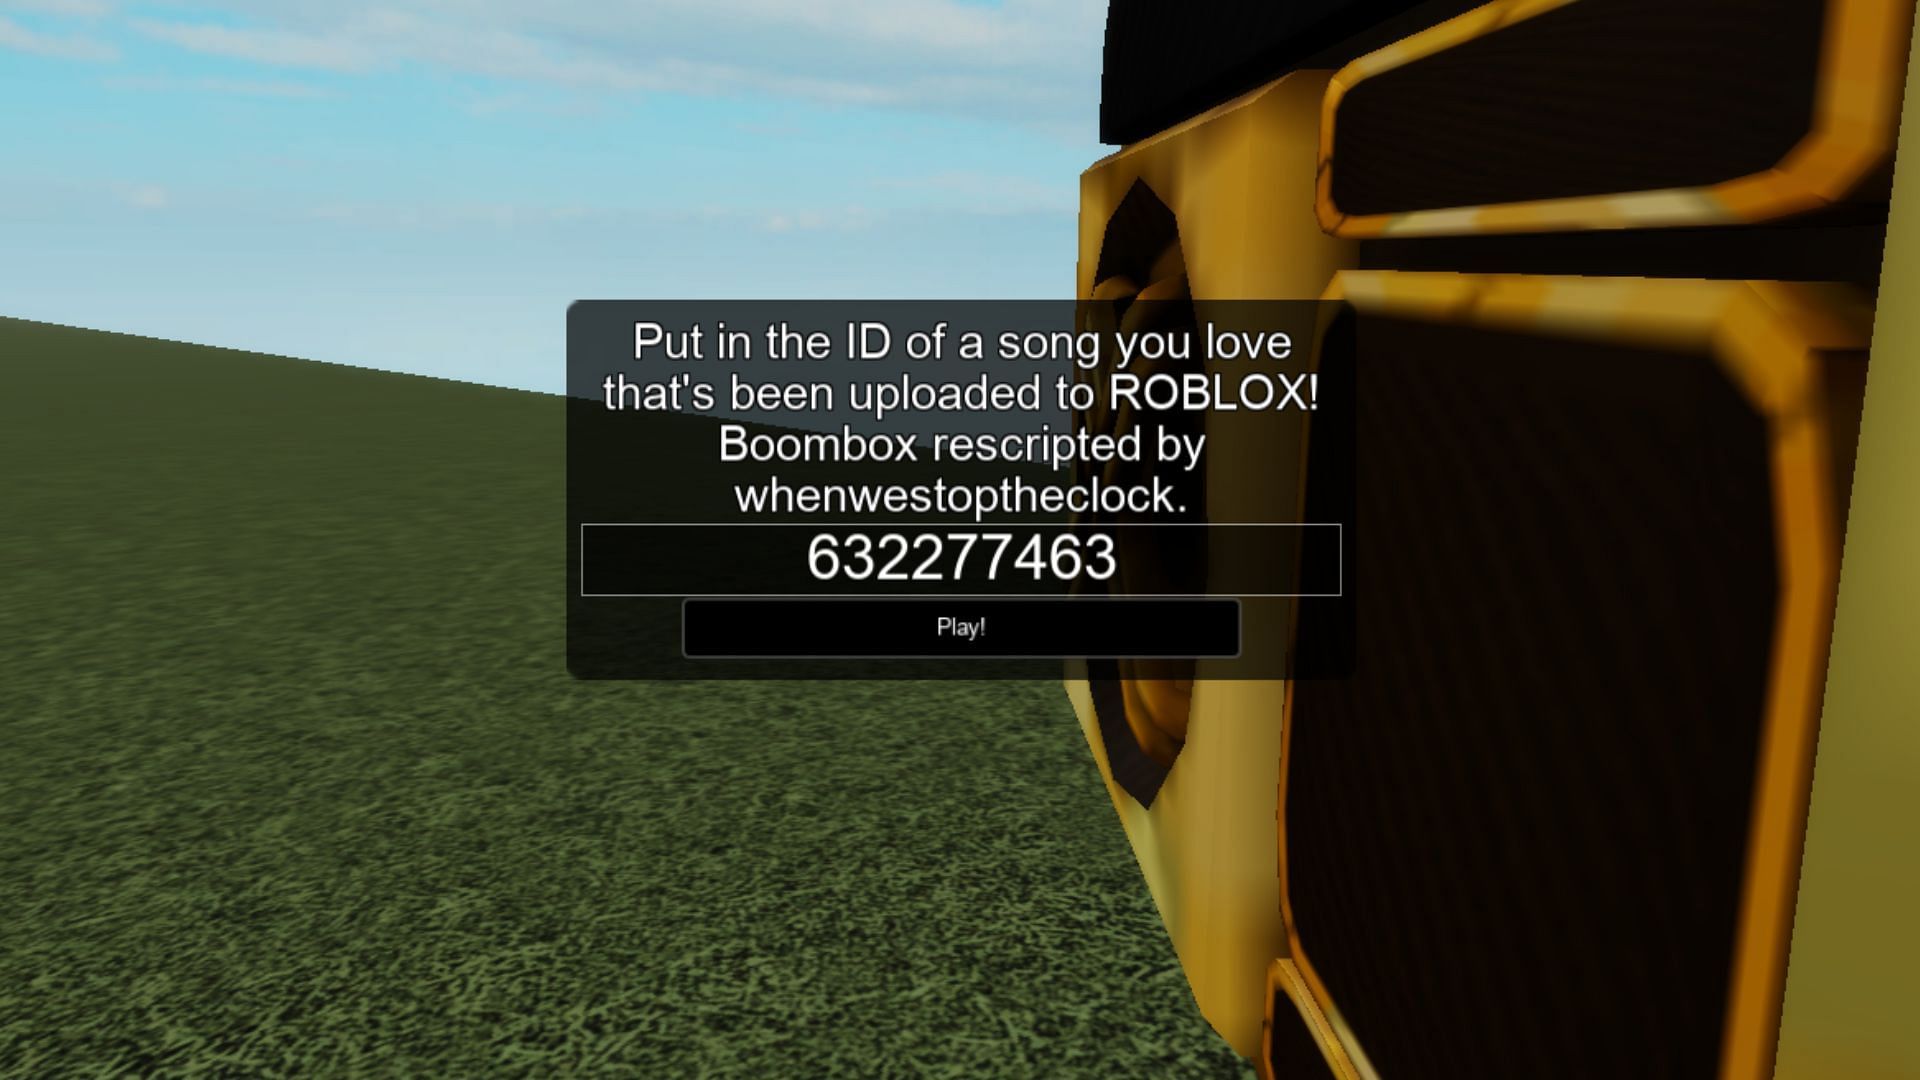 Using a Boombox to play a song (Image via Roblox||Sportskeeda)